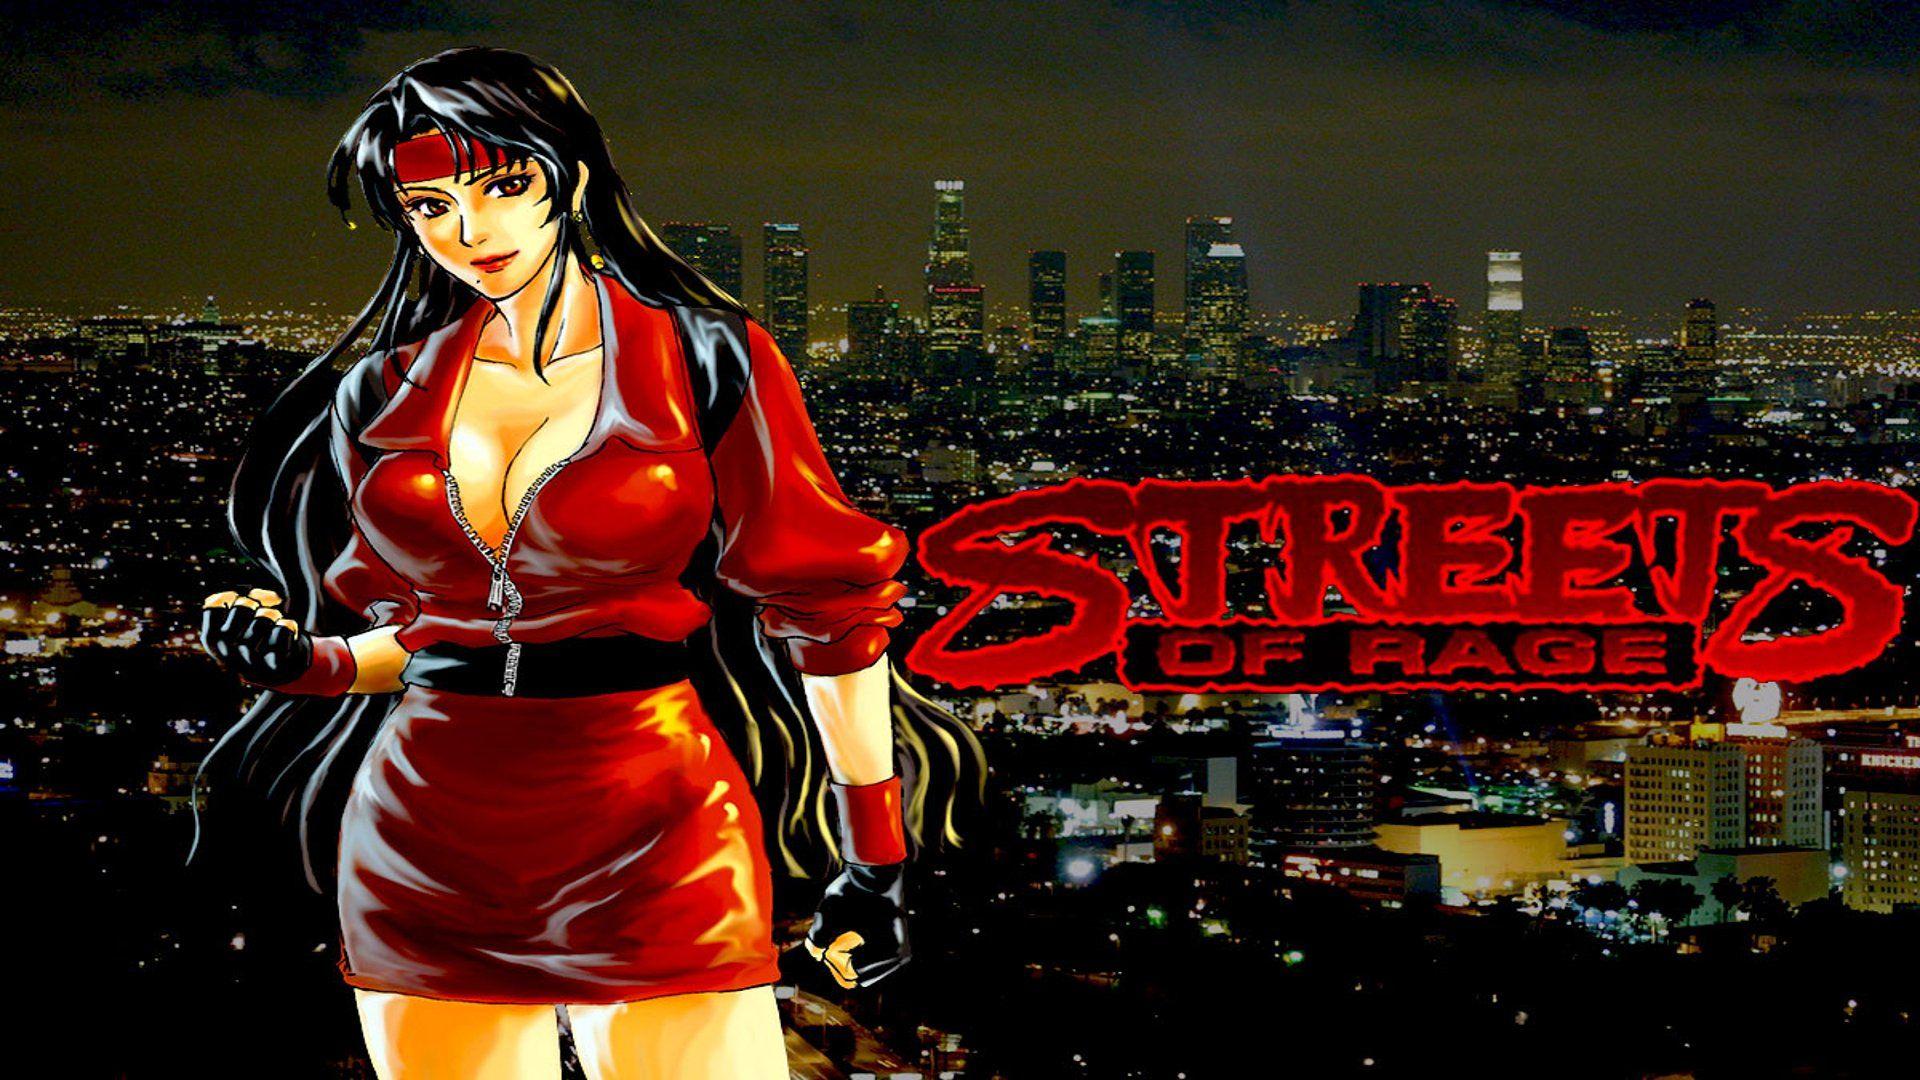 Streets of Rage Wallpaper (78+ images)